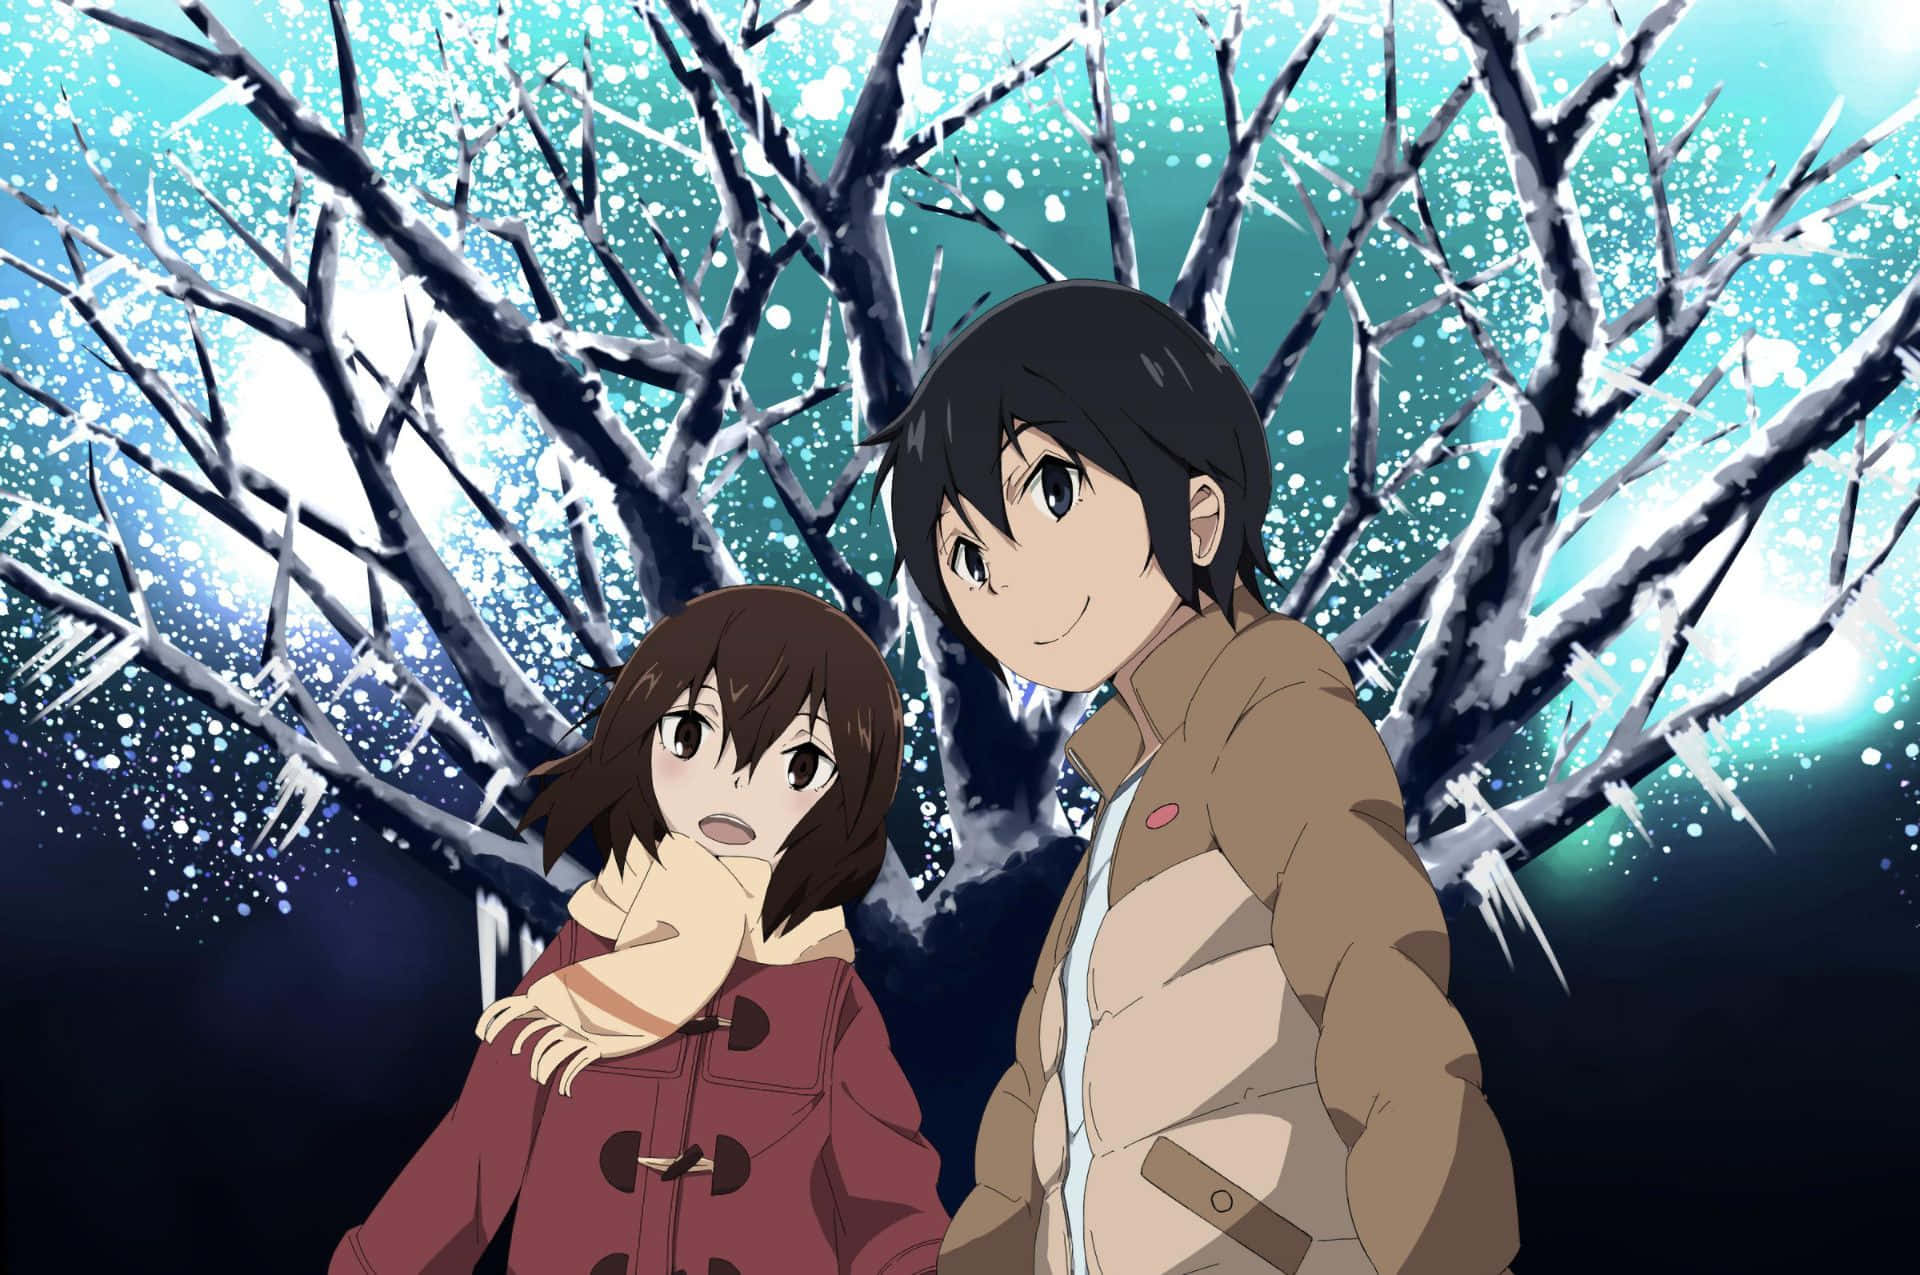 HD wallpaper male and female anime characters on road with snow ERASED  Boku Dake Ga Inai Machi  Wallpaper Flare